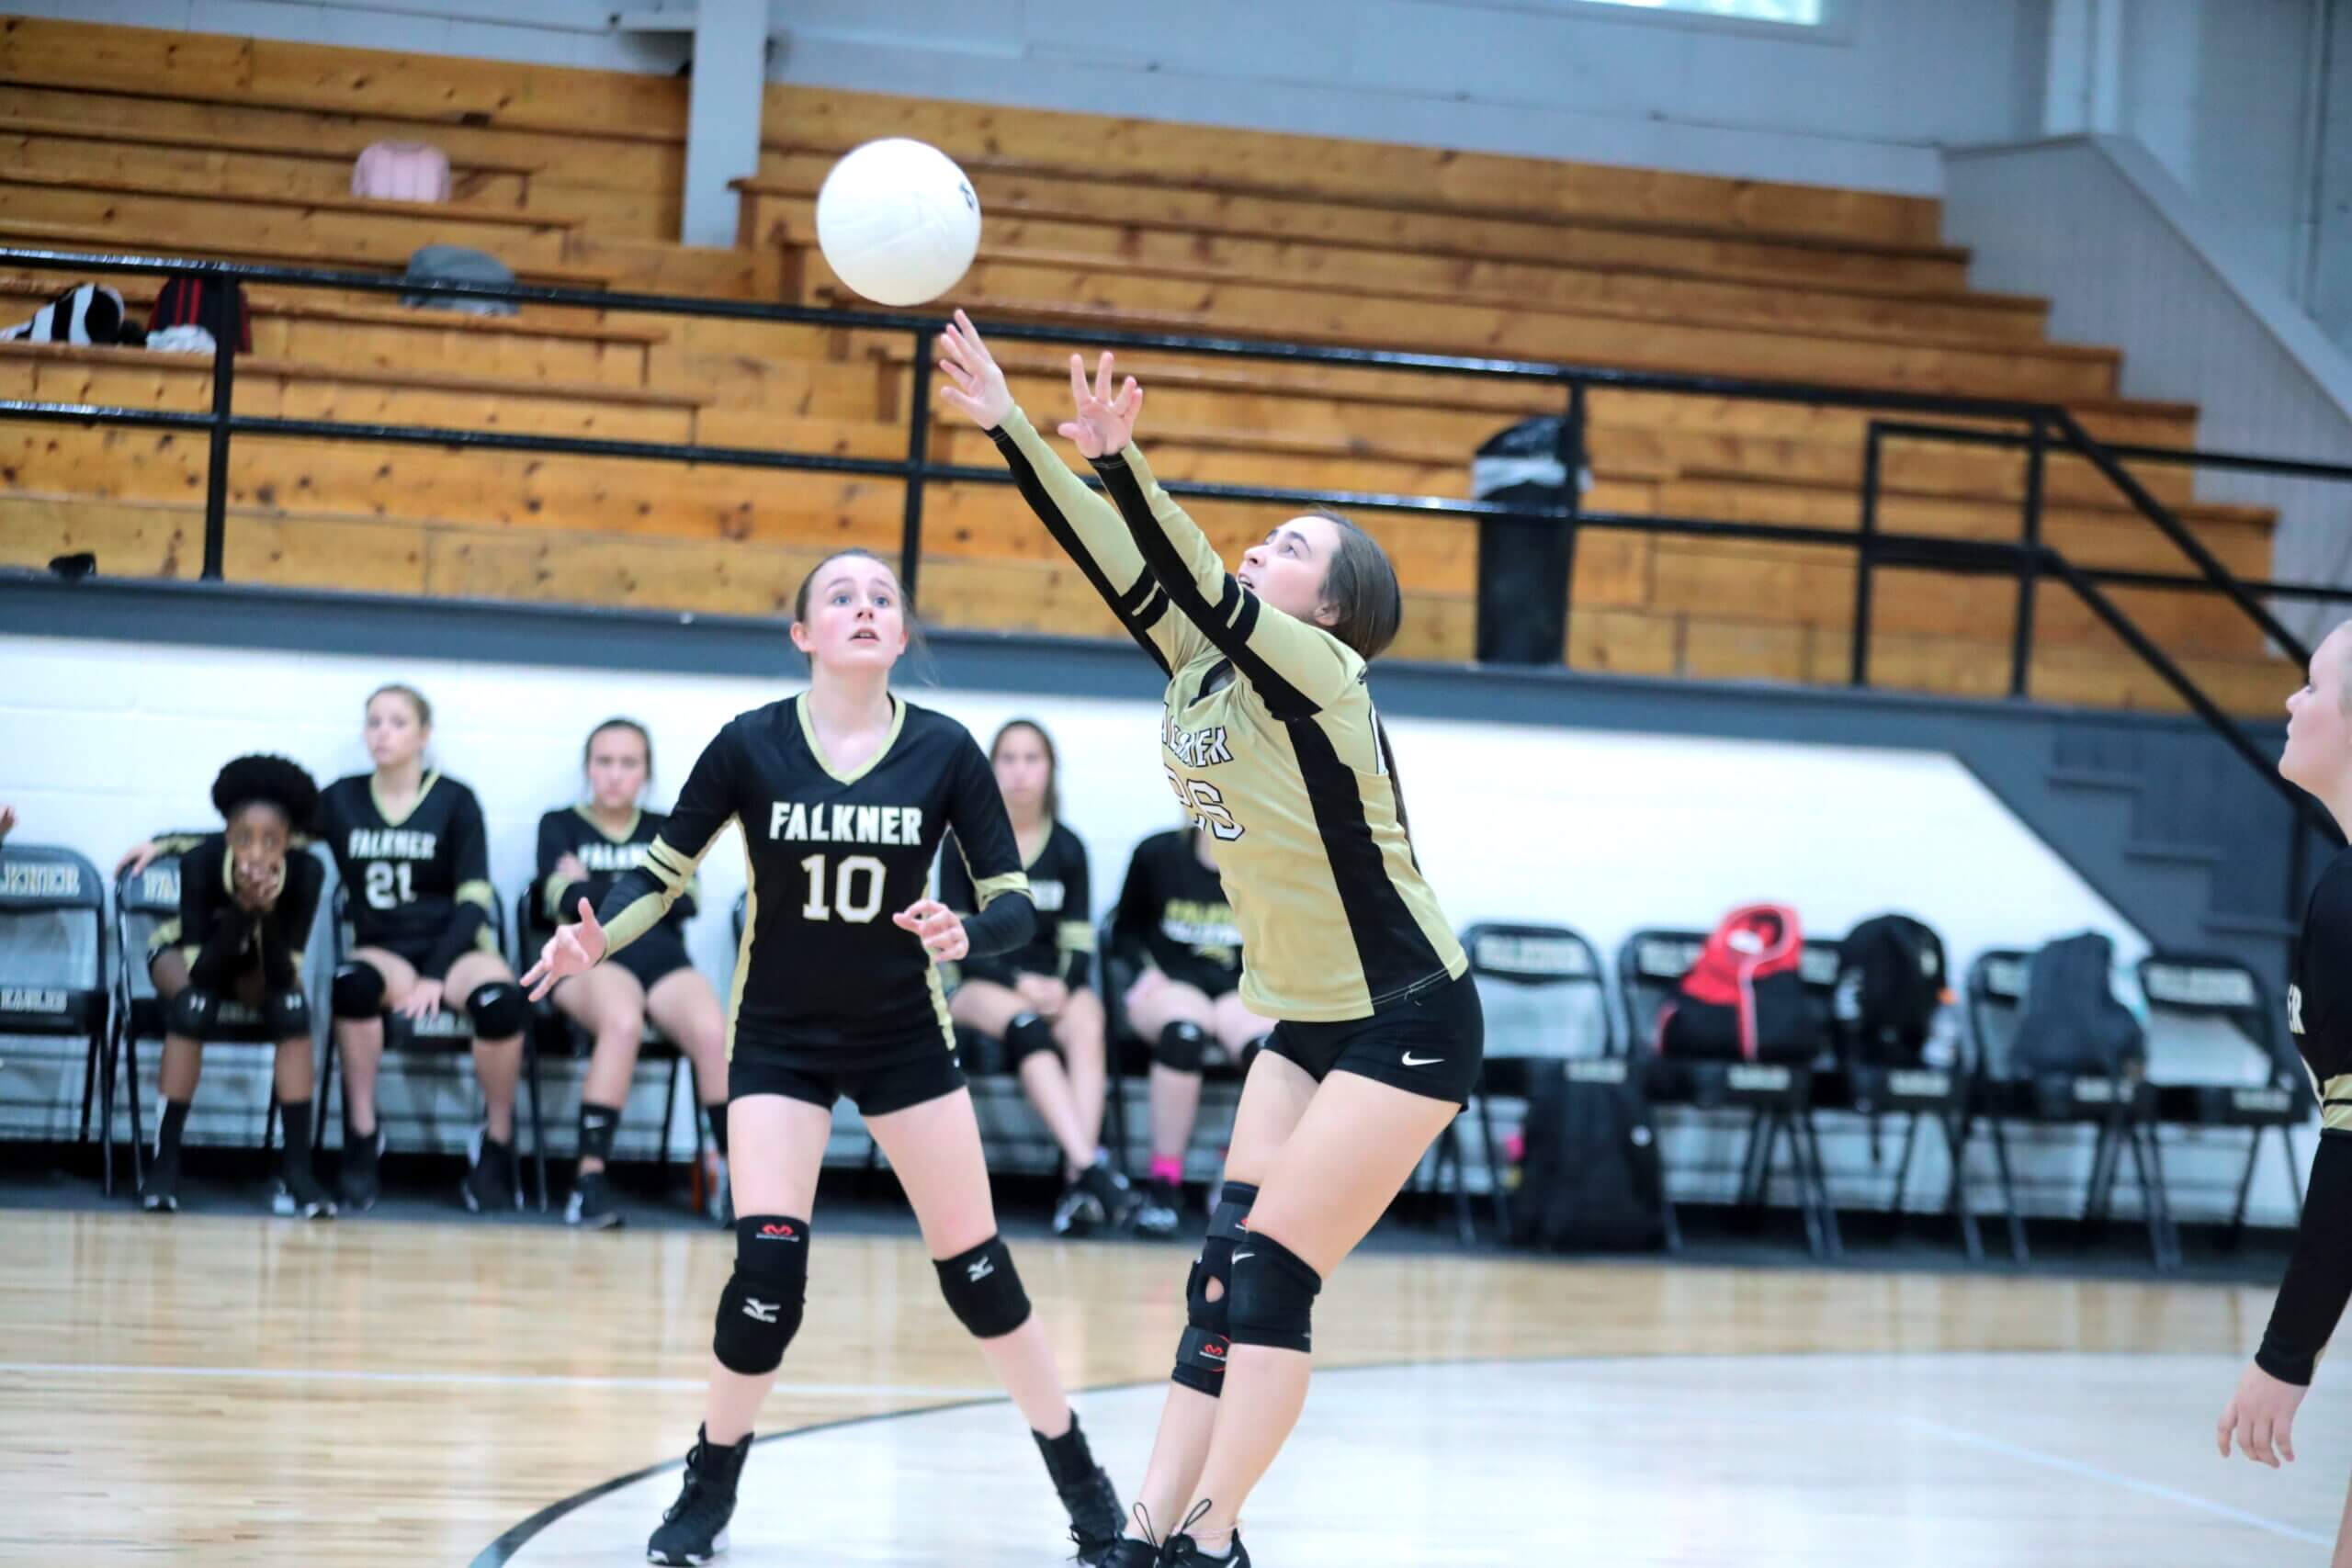 Volleyball midweek roundup: Pine Grove has a tough road test while Ripley, Falkner and Walnut look to get wins at home